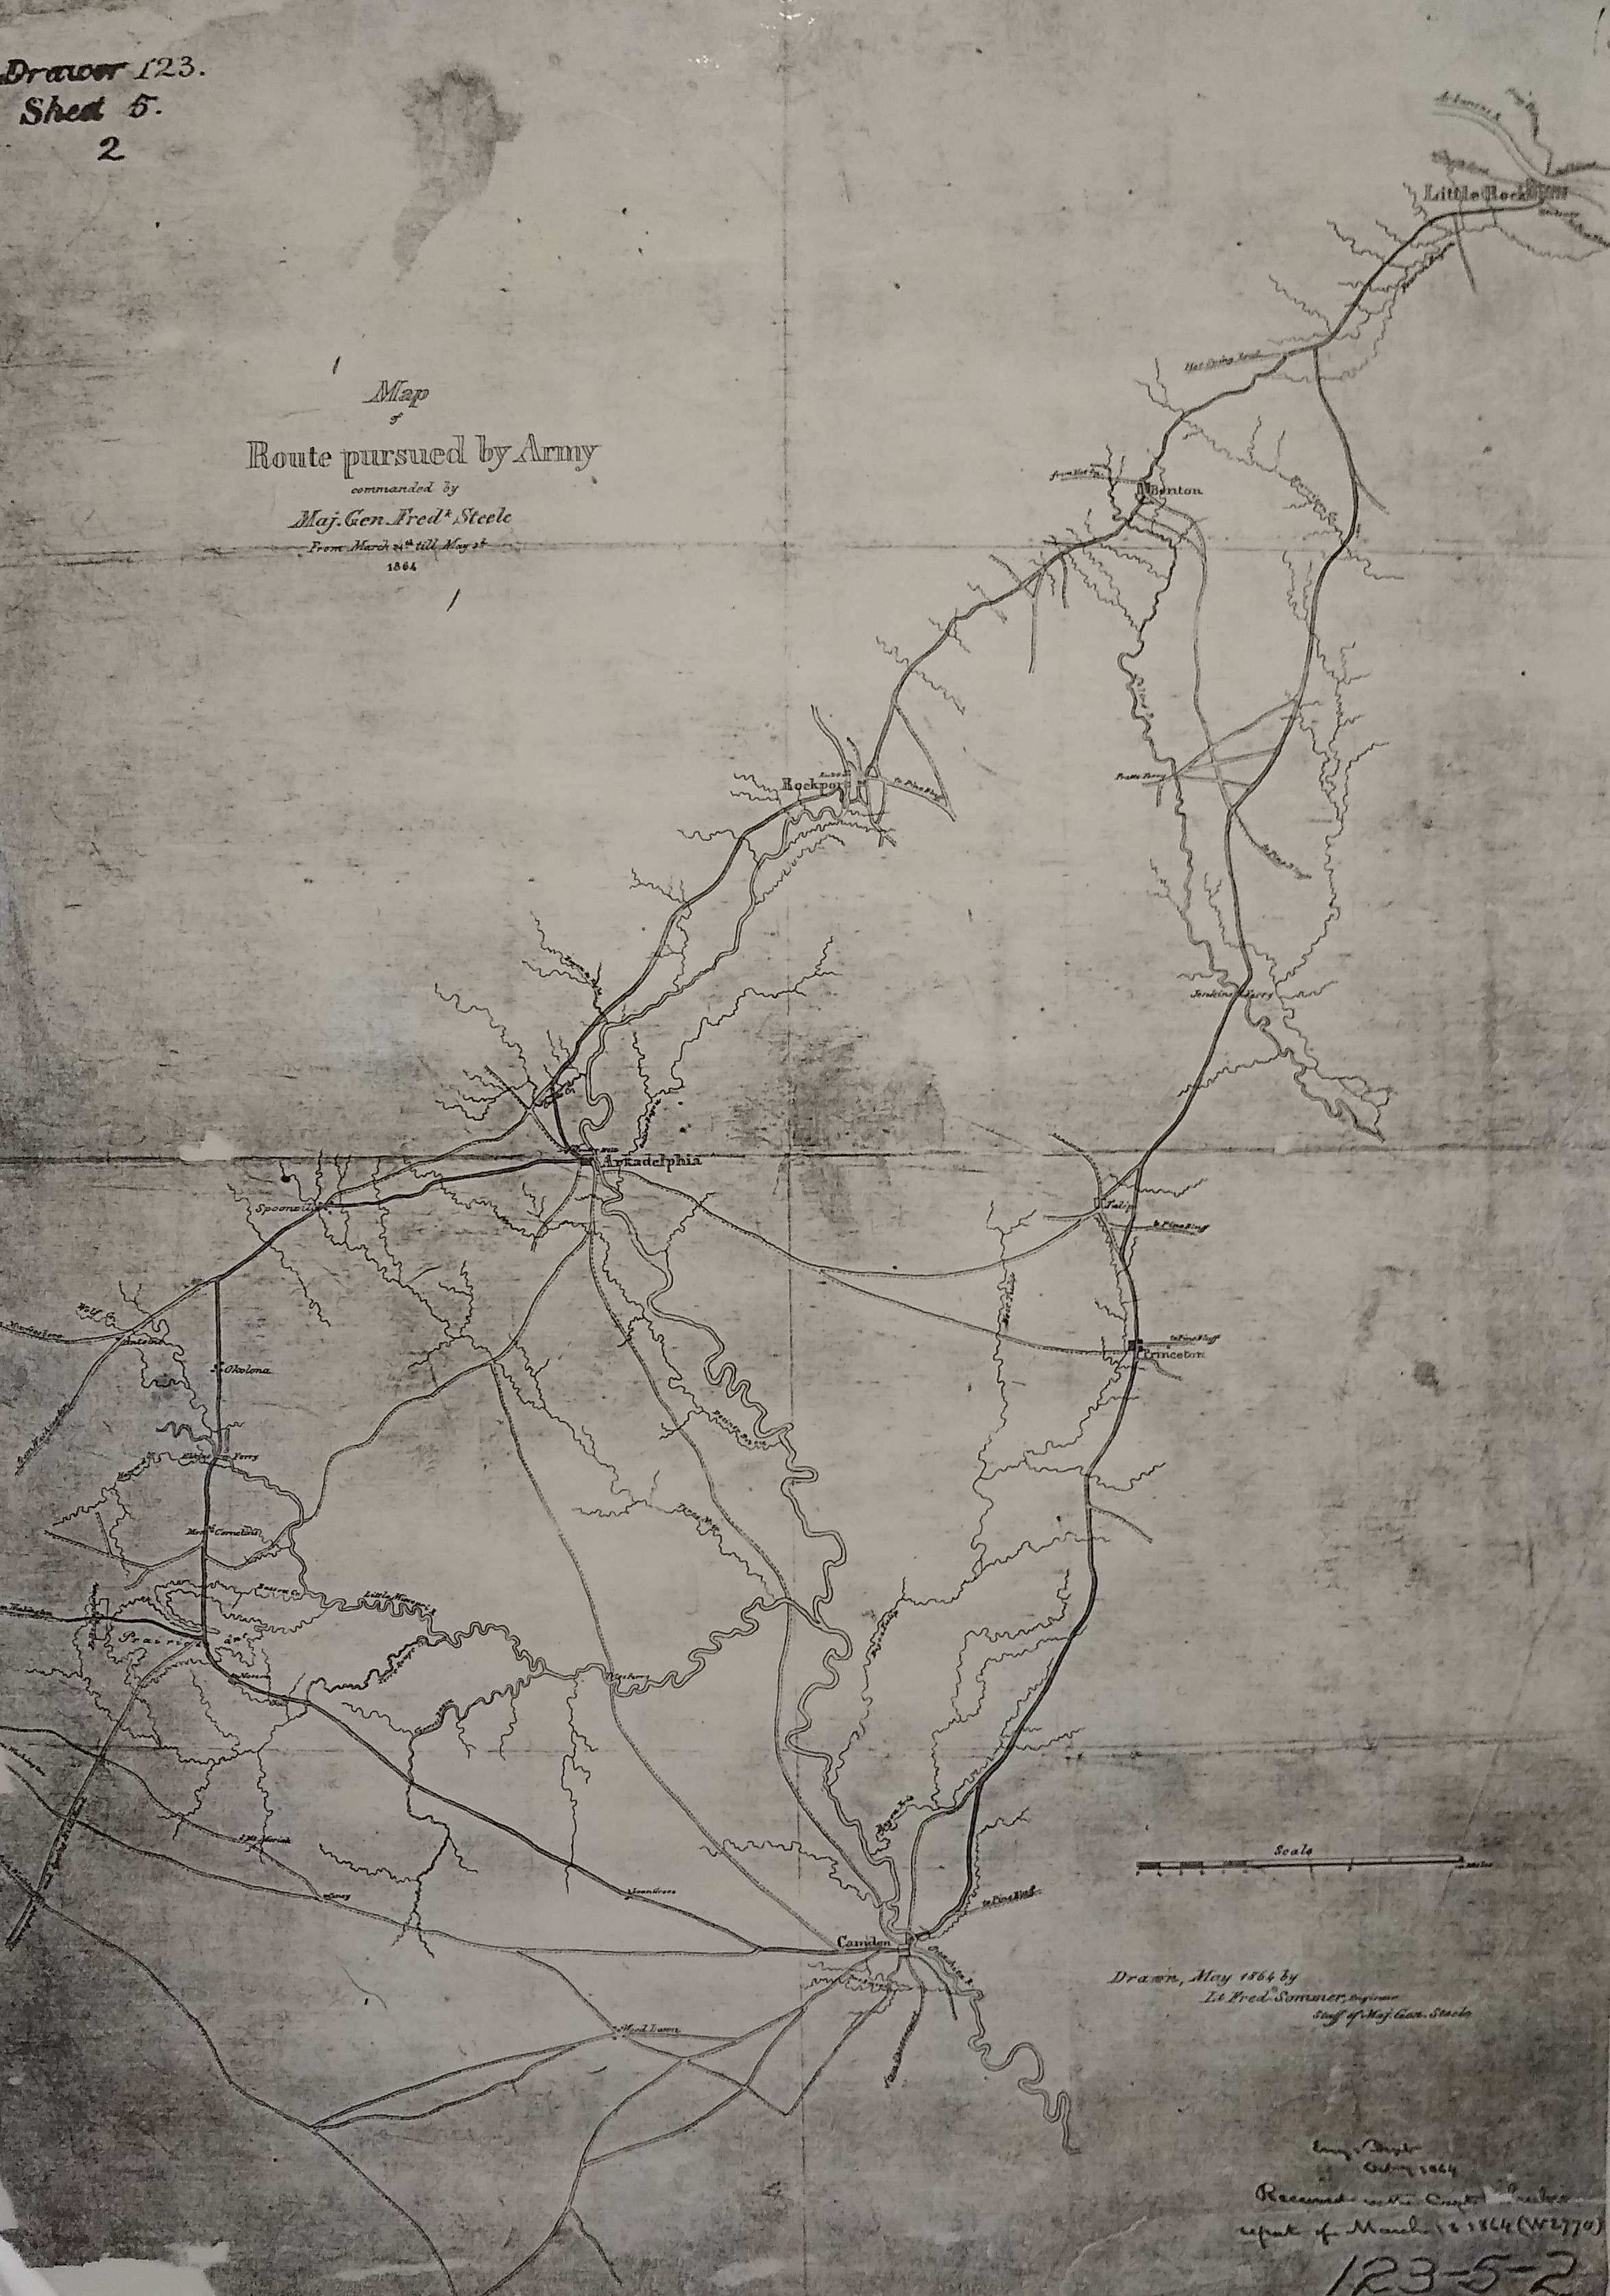 1864 Route pursued by Army - Steele